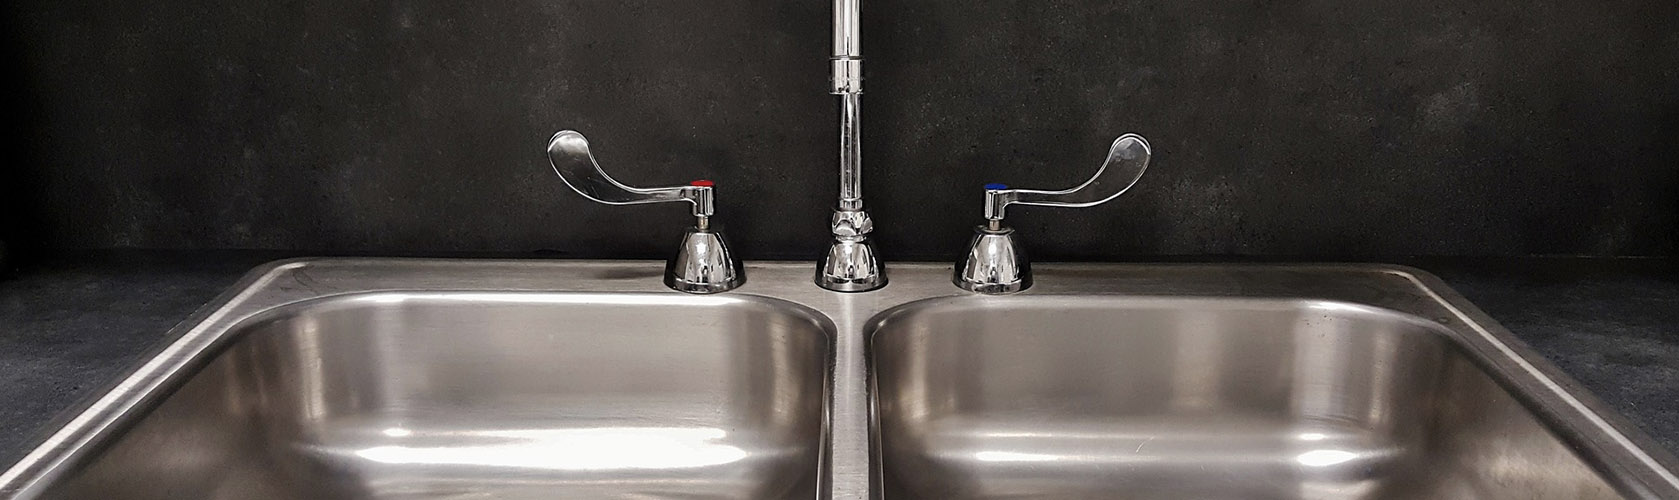 2 pan kitchen sink with hot and cold faucet handles